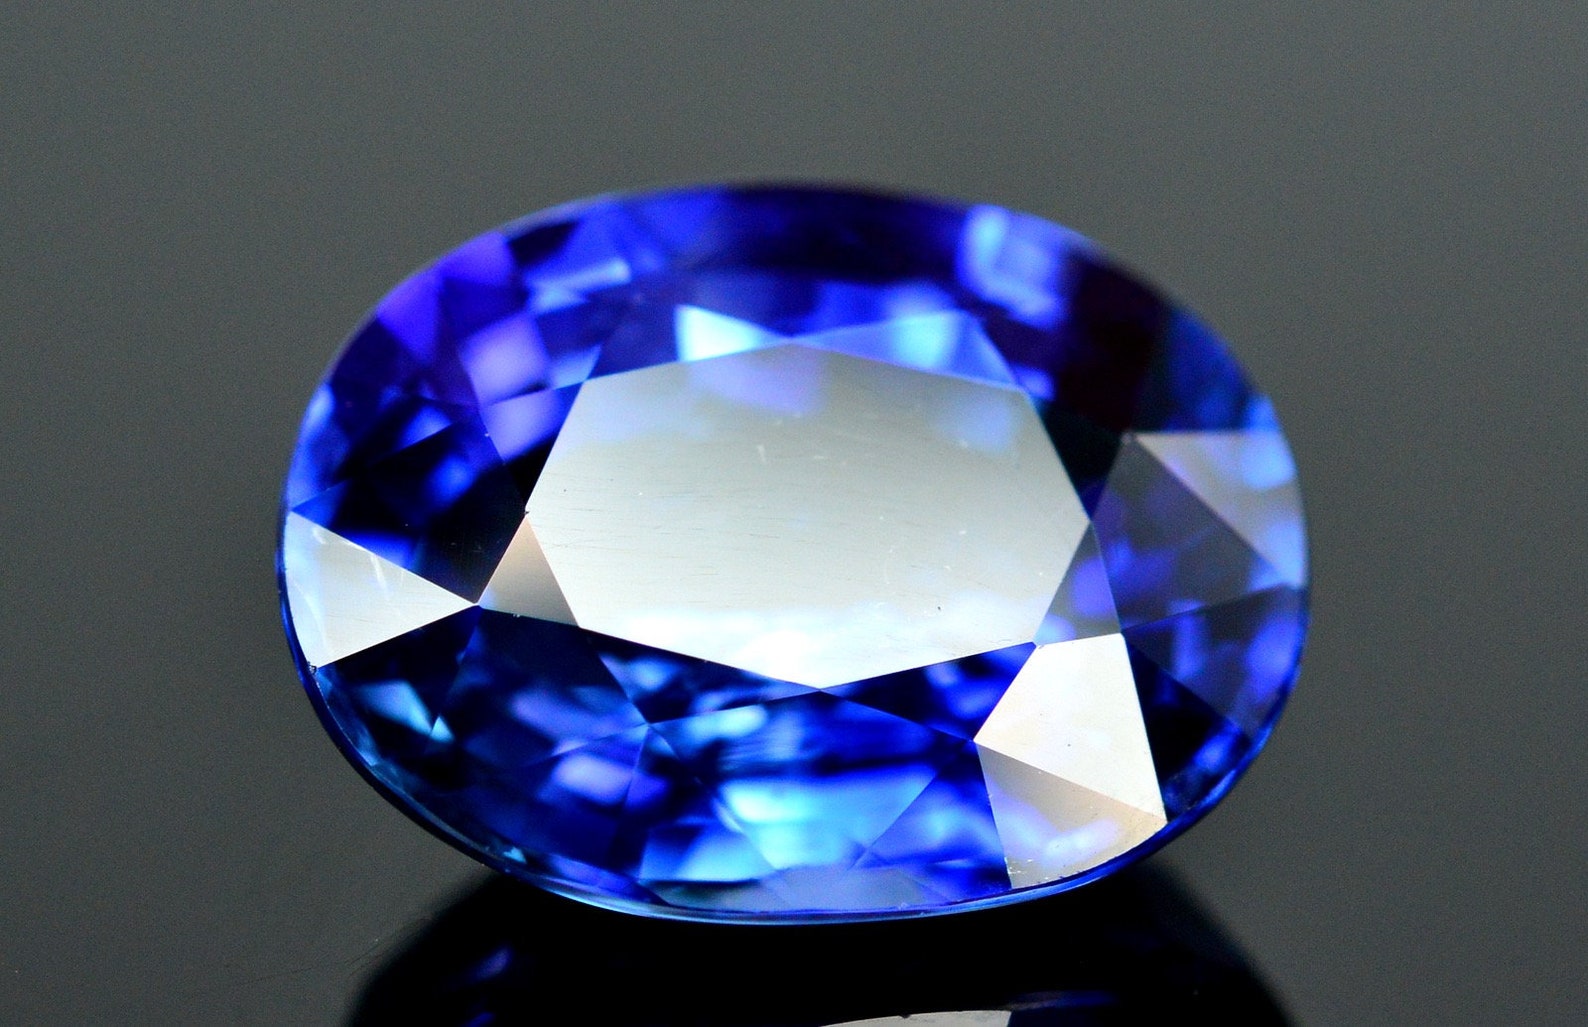 Amazing Royal Blue 4.16 Ct Natural Ceylon Sapphire From | Etsy